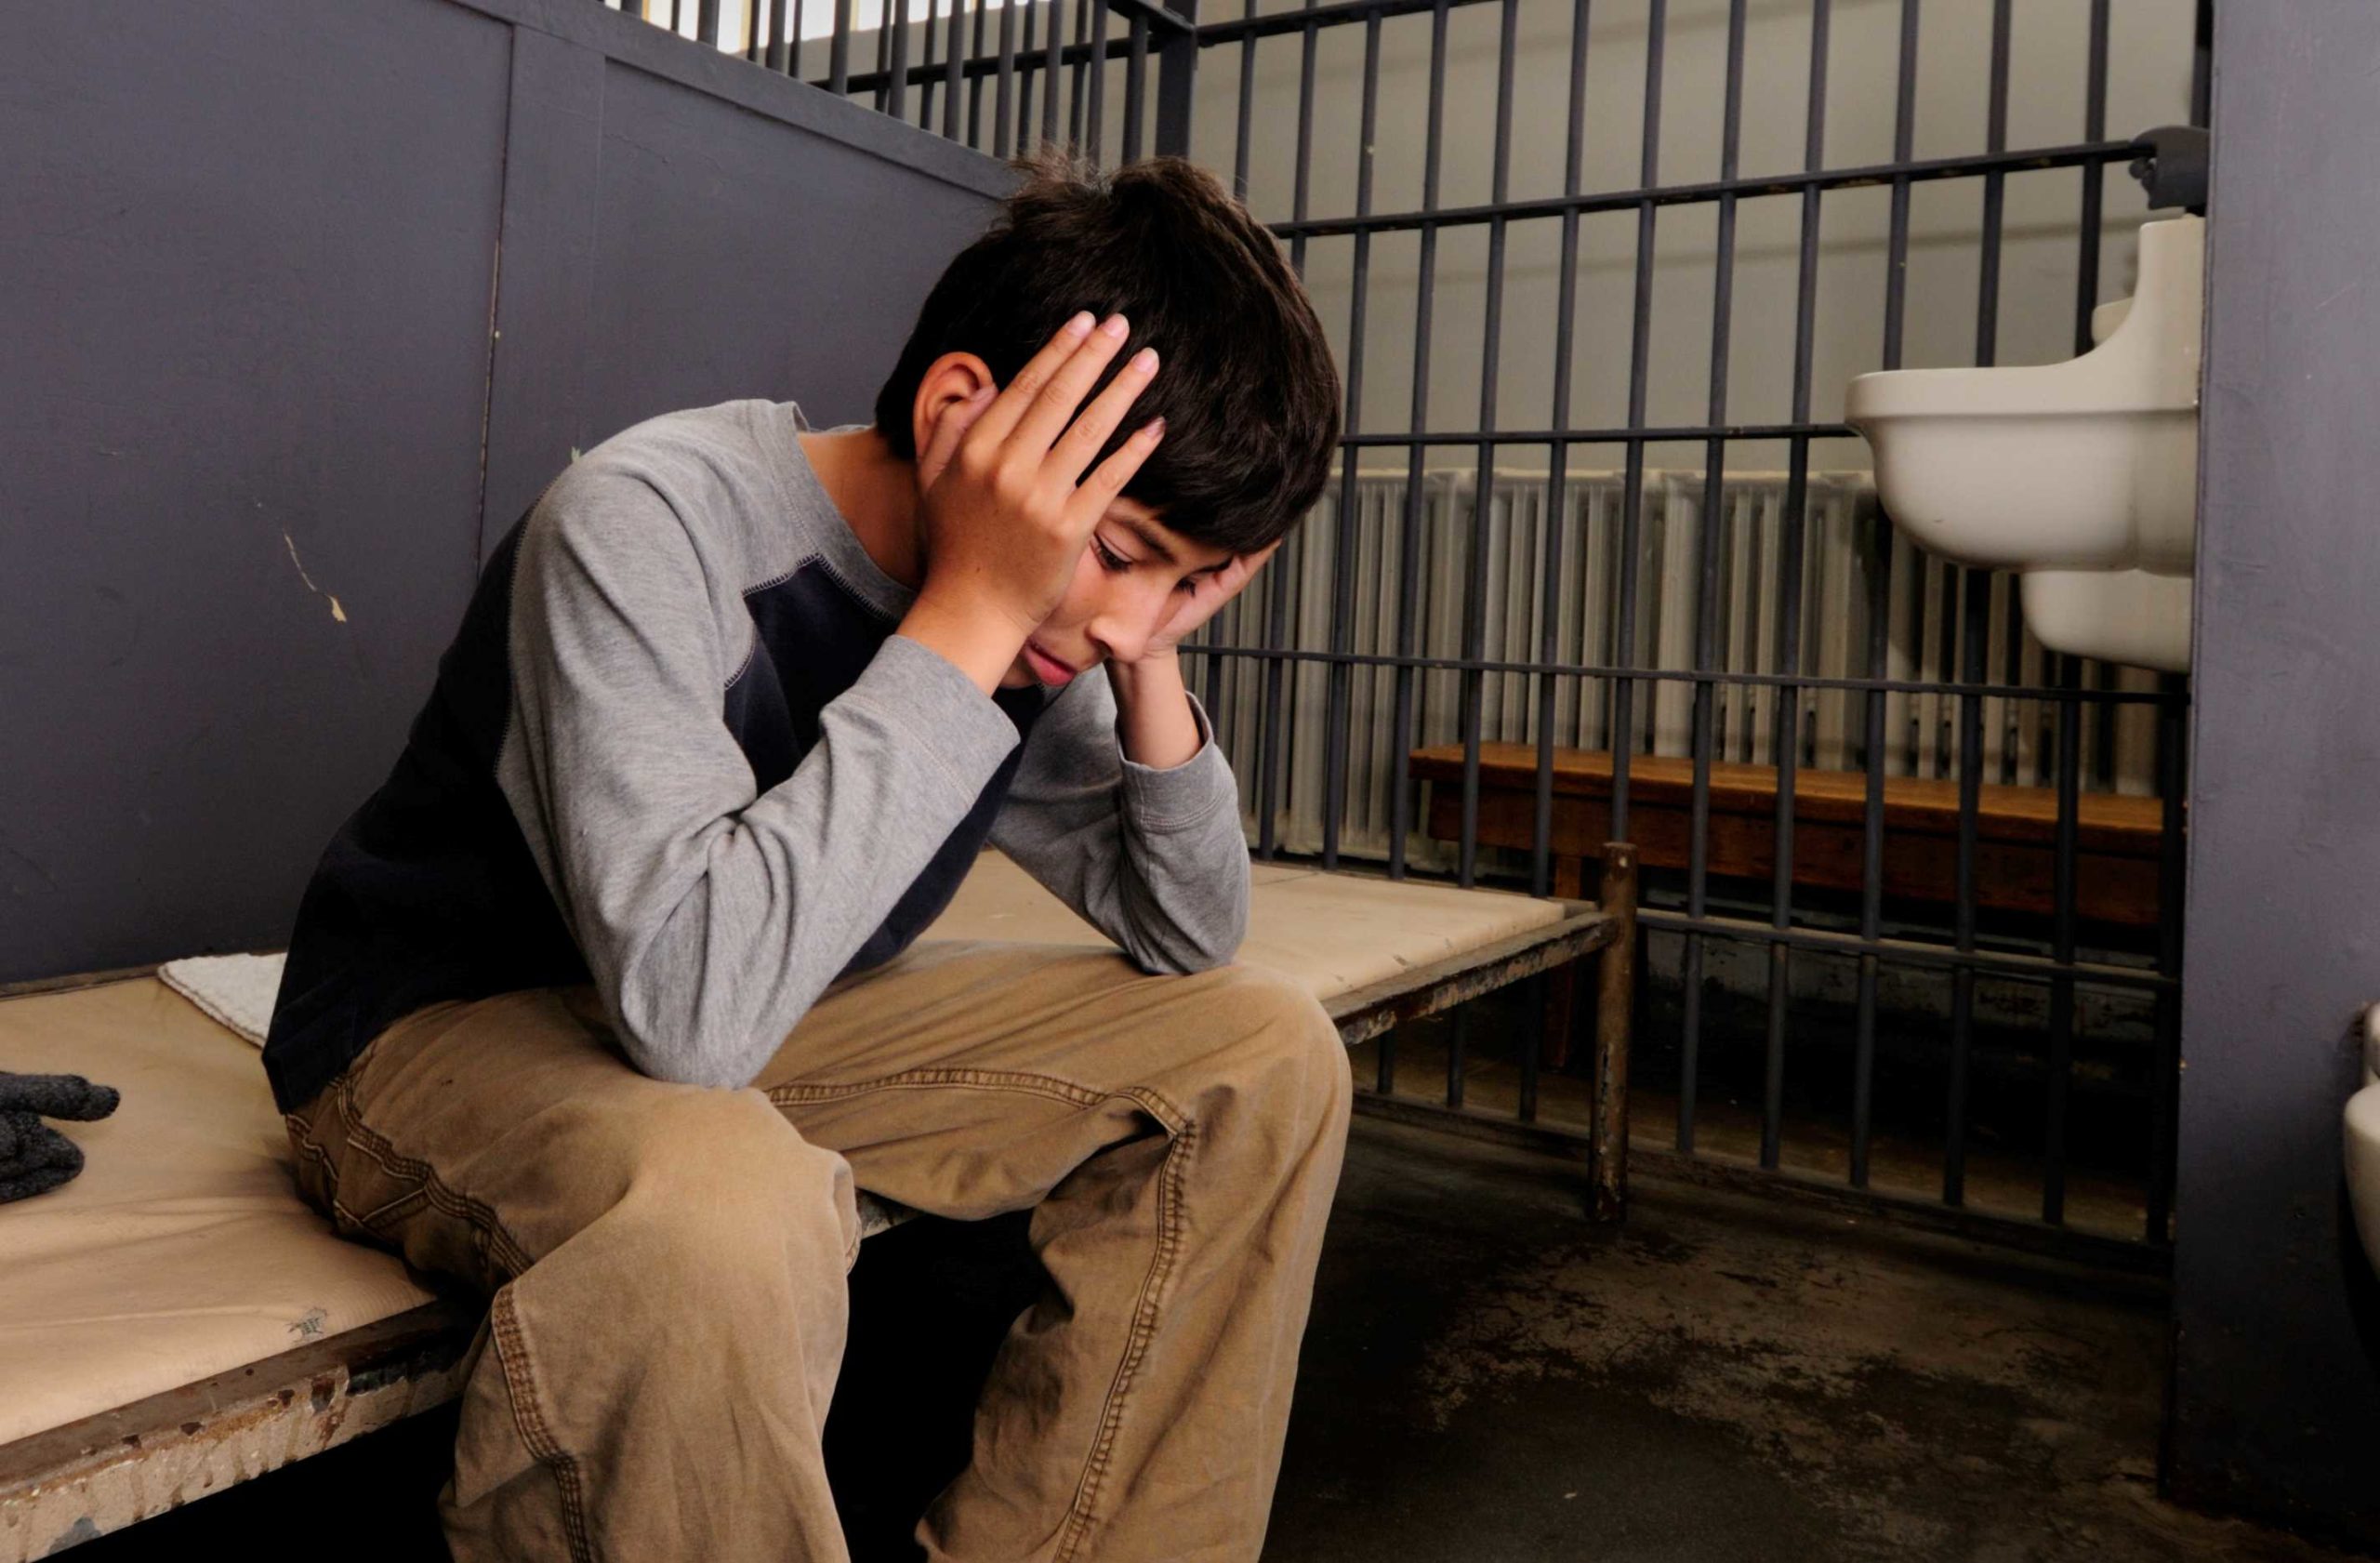 Teenager sitting in a jail cell